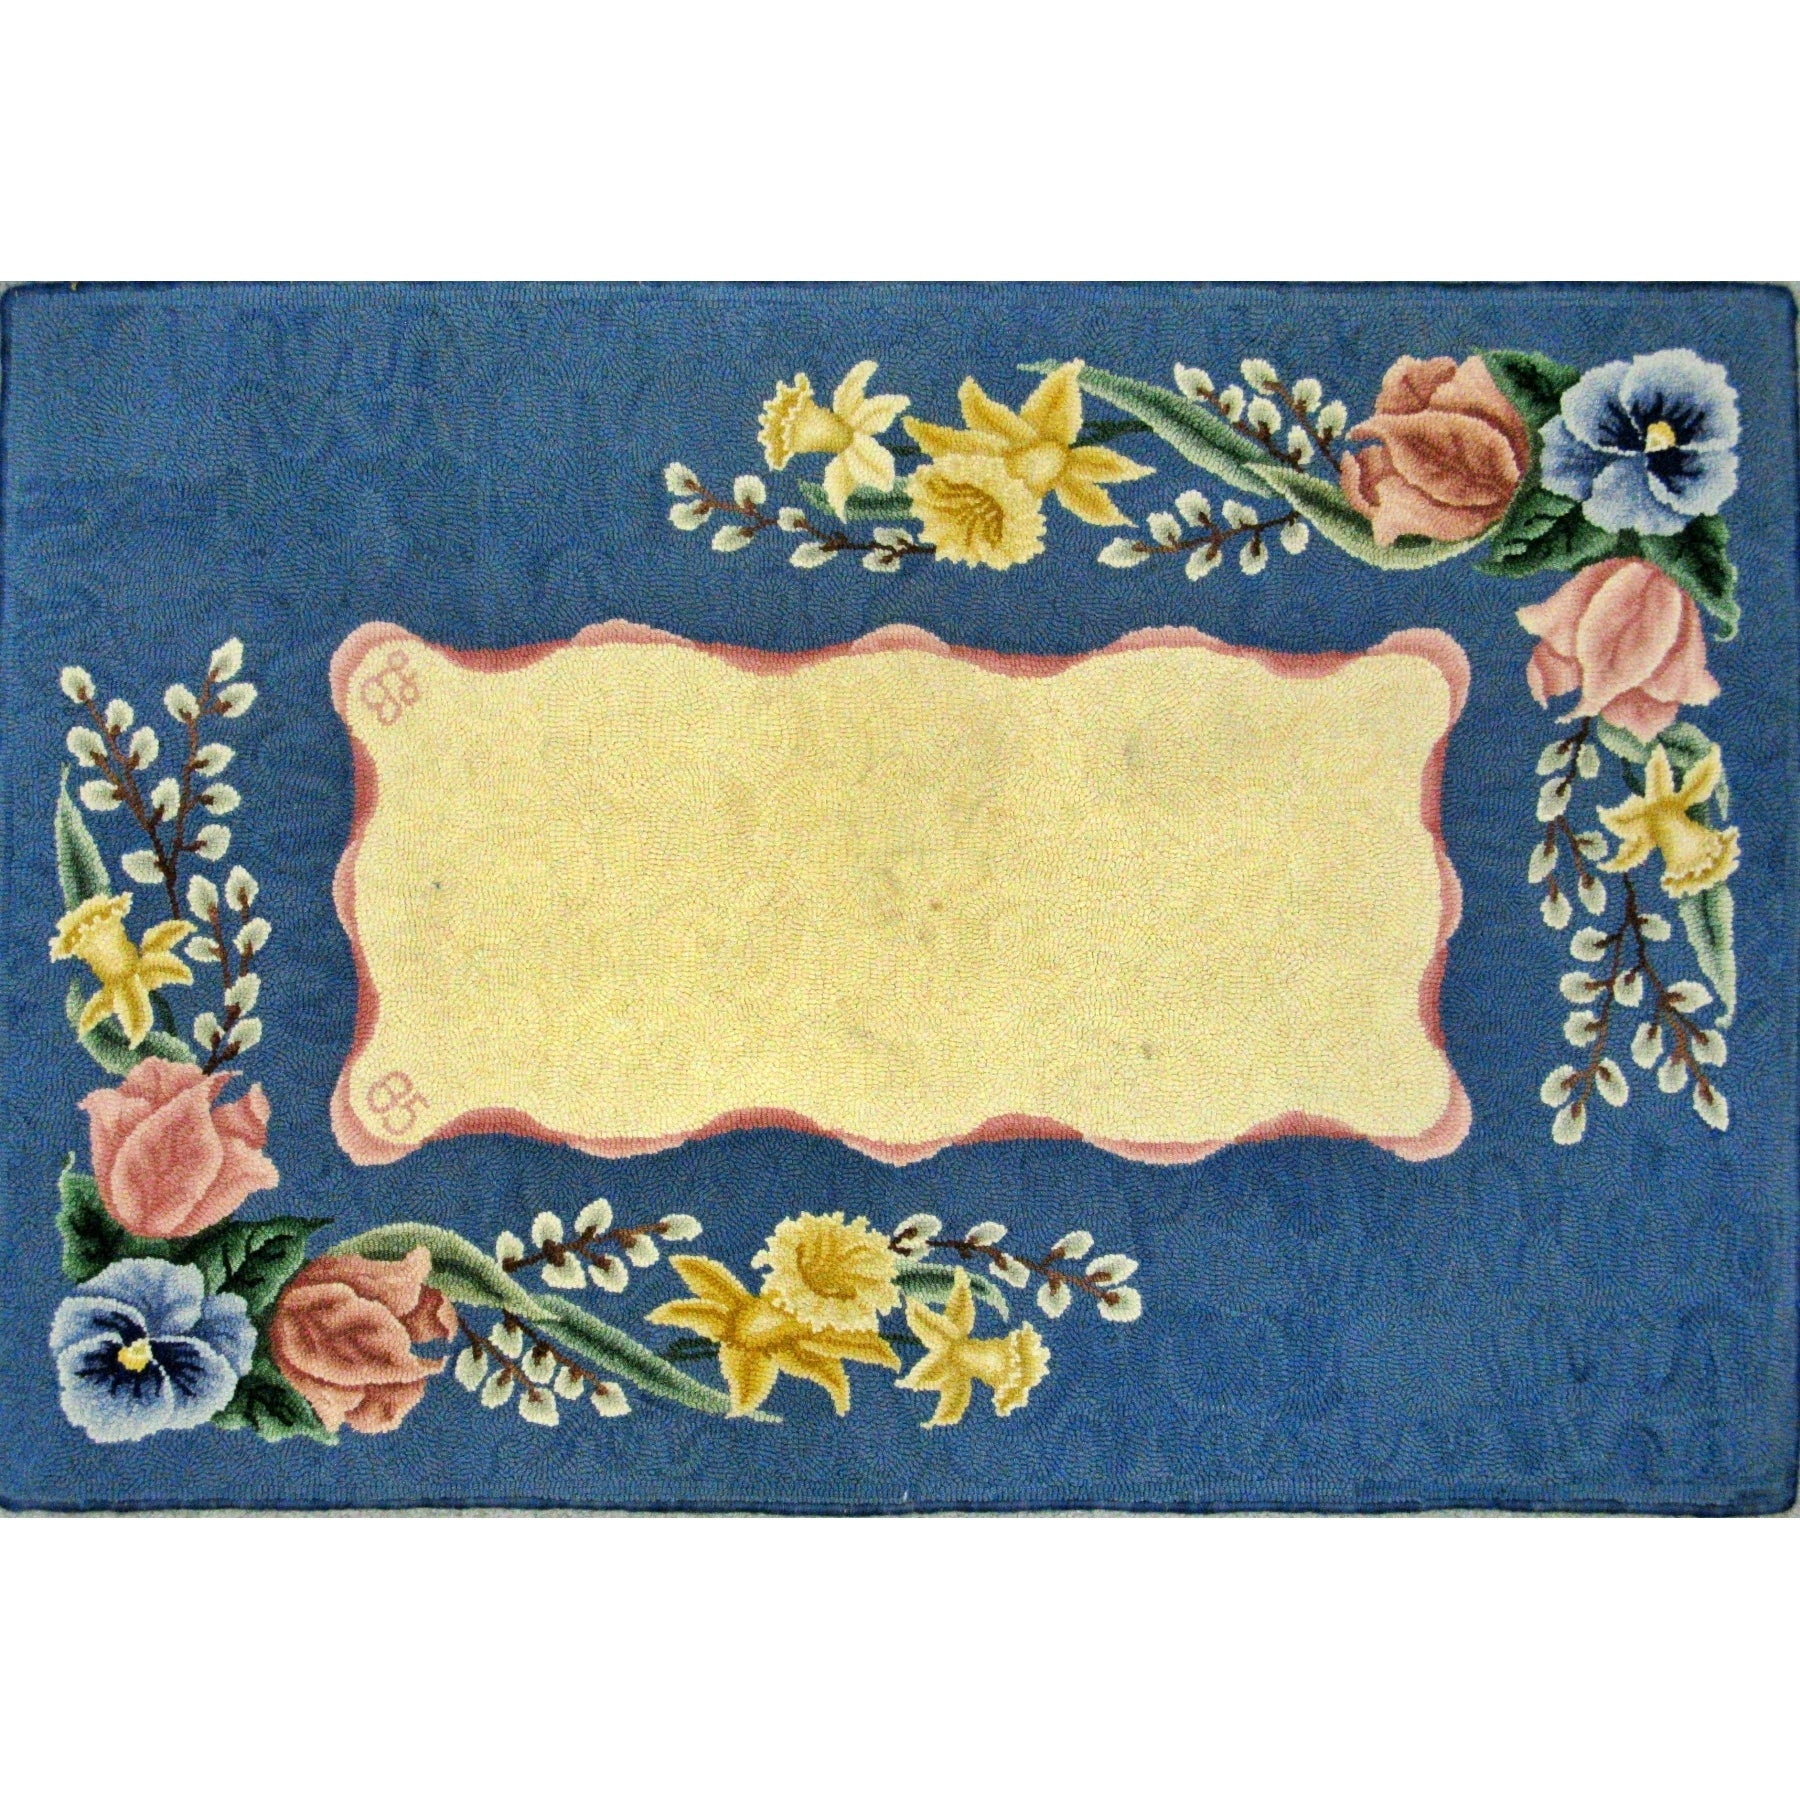 Early Spring, rug hooked by Linda Bell